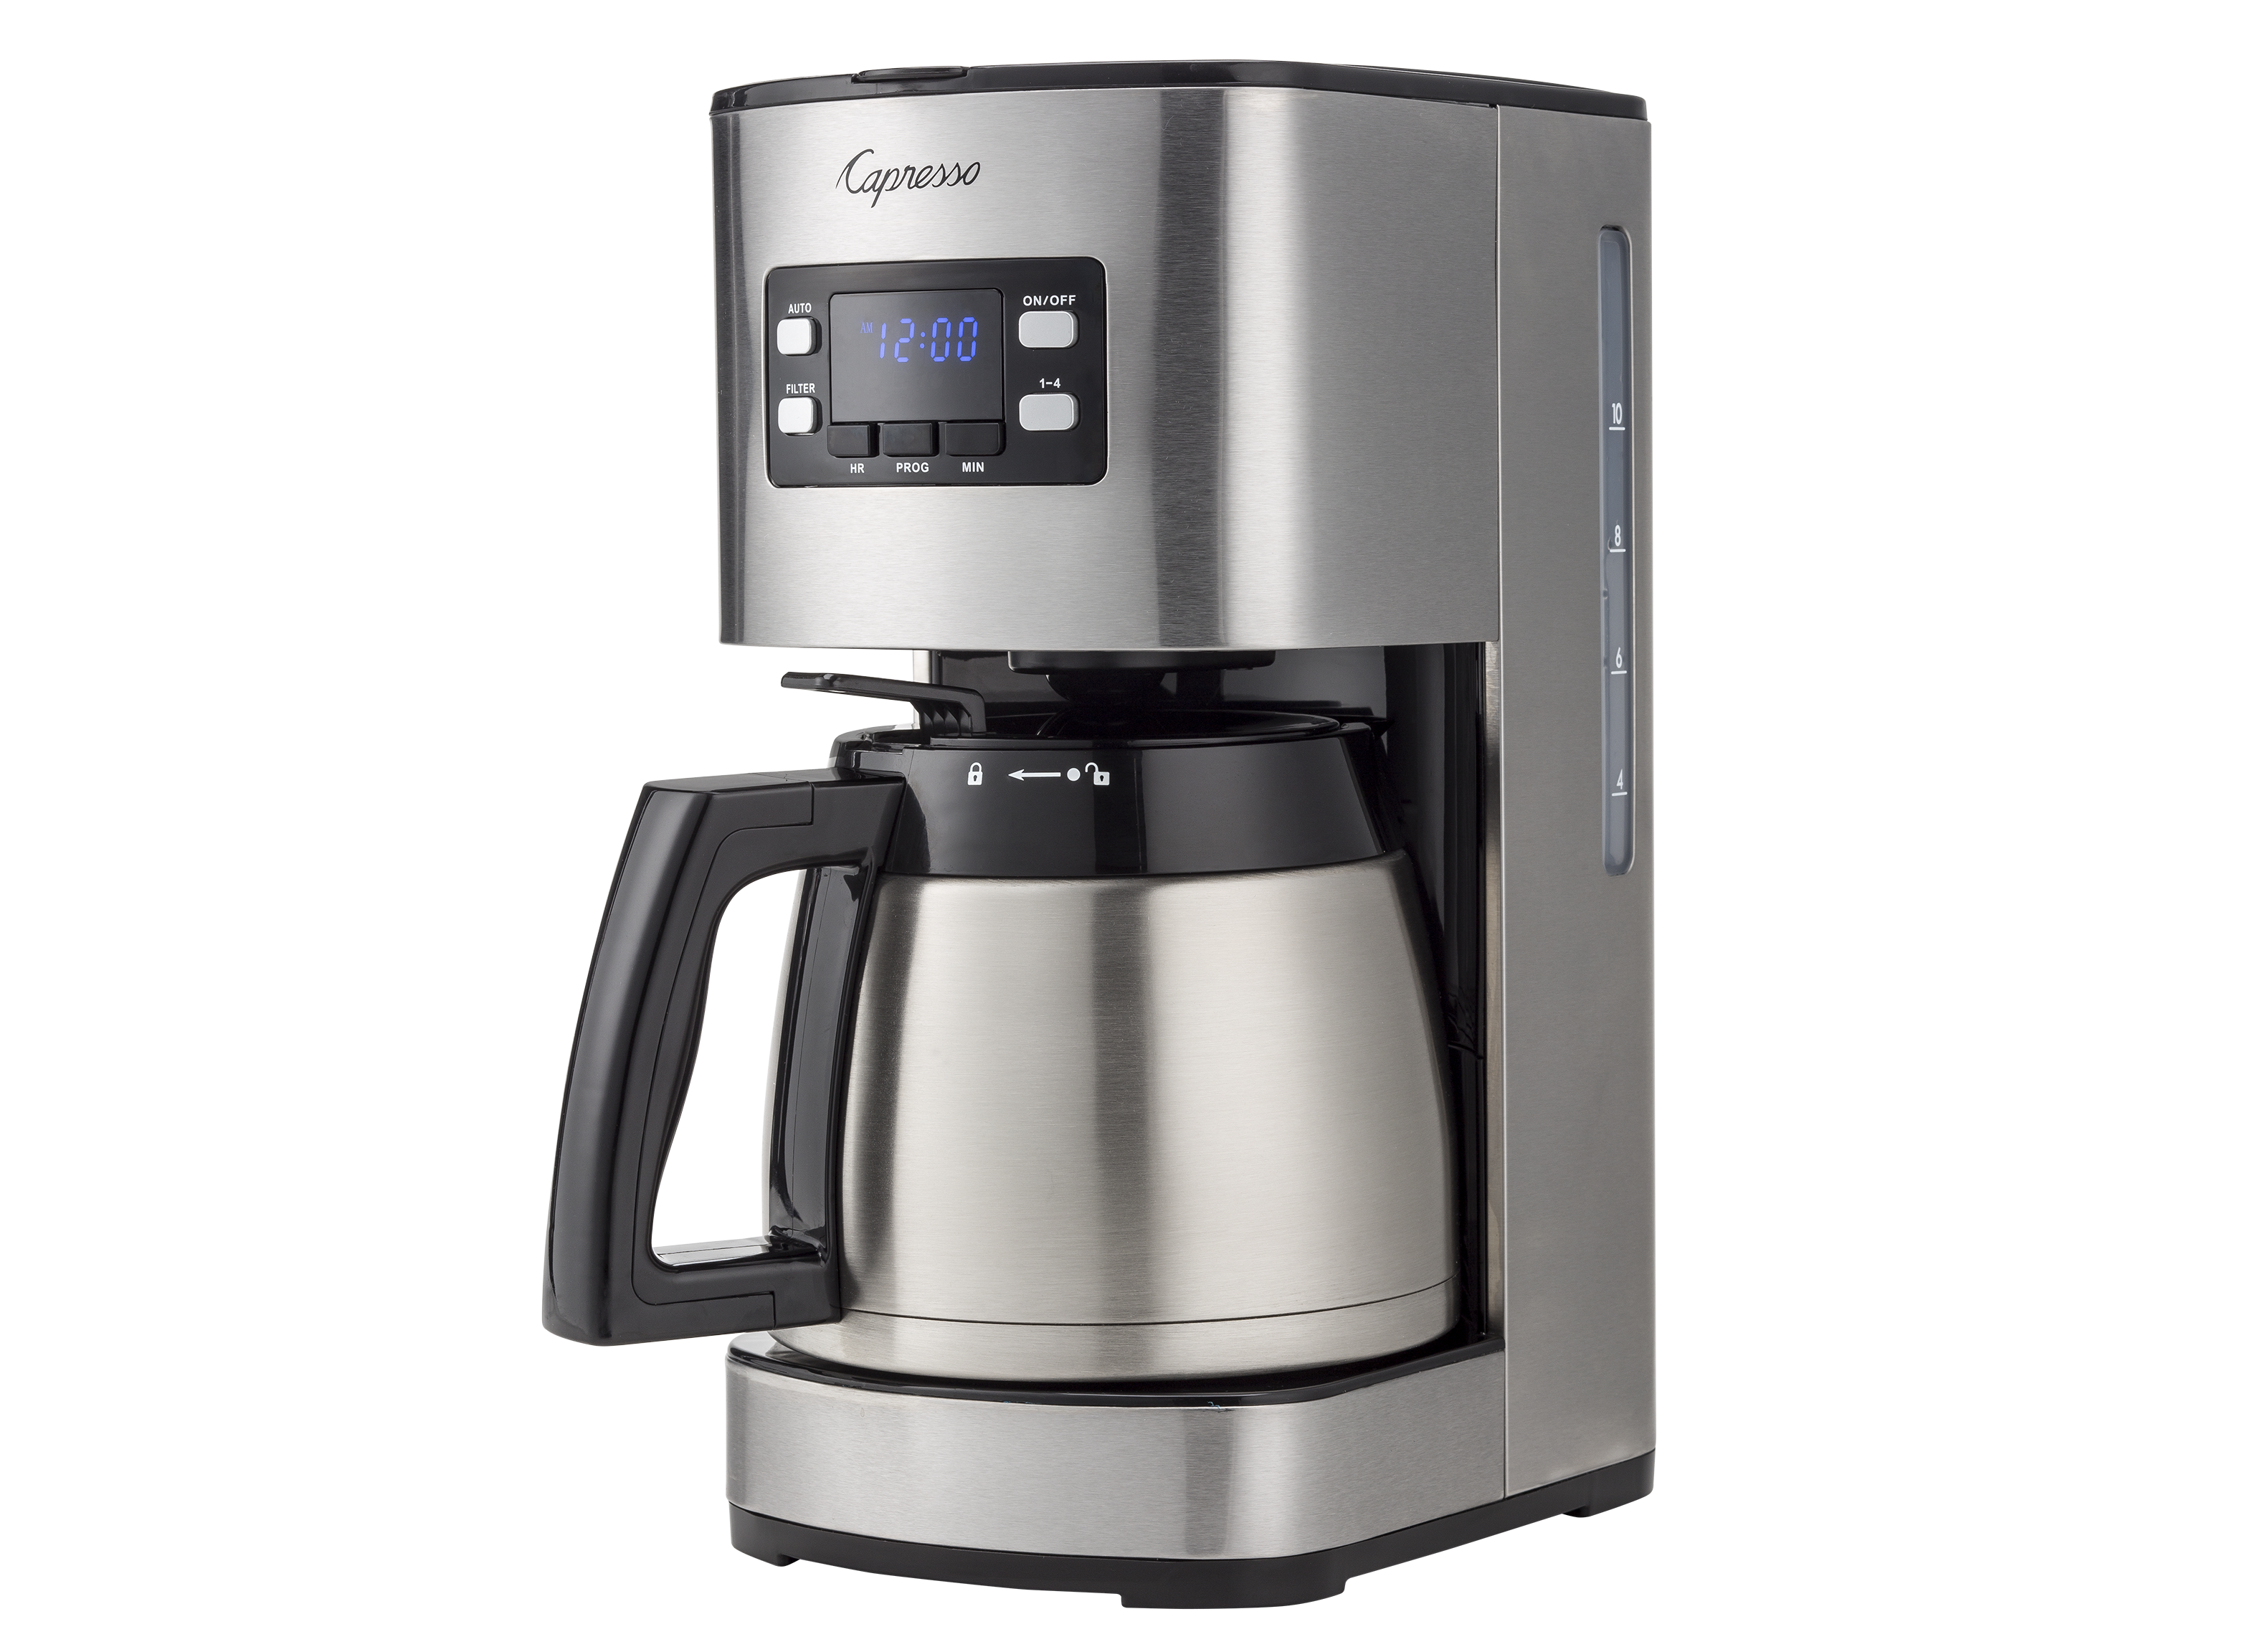 Capresso 10-cup Coffee Maker With Thermal Carafe St300 – Stainless Steel  435.05 : Target